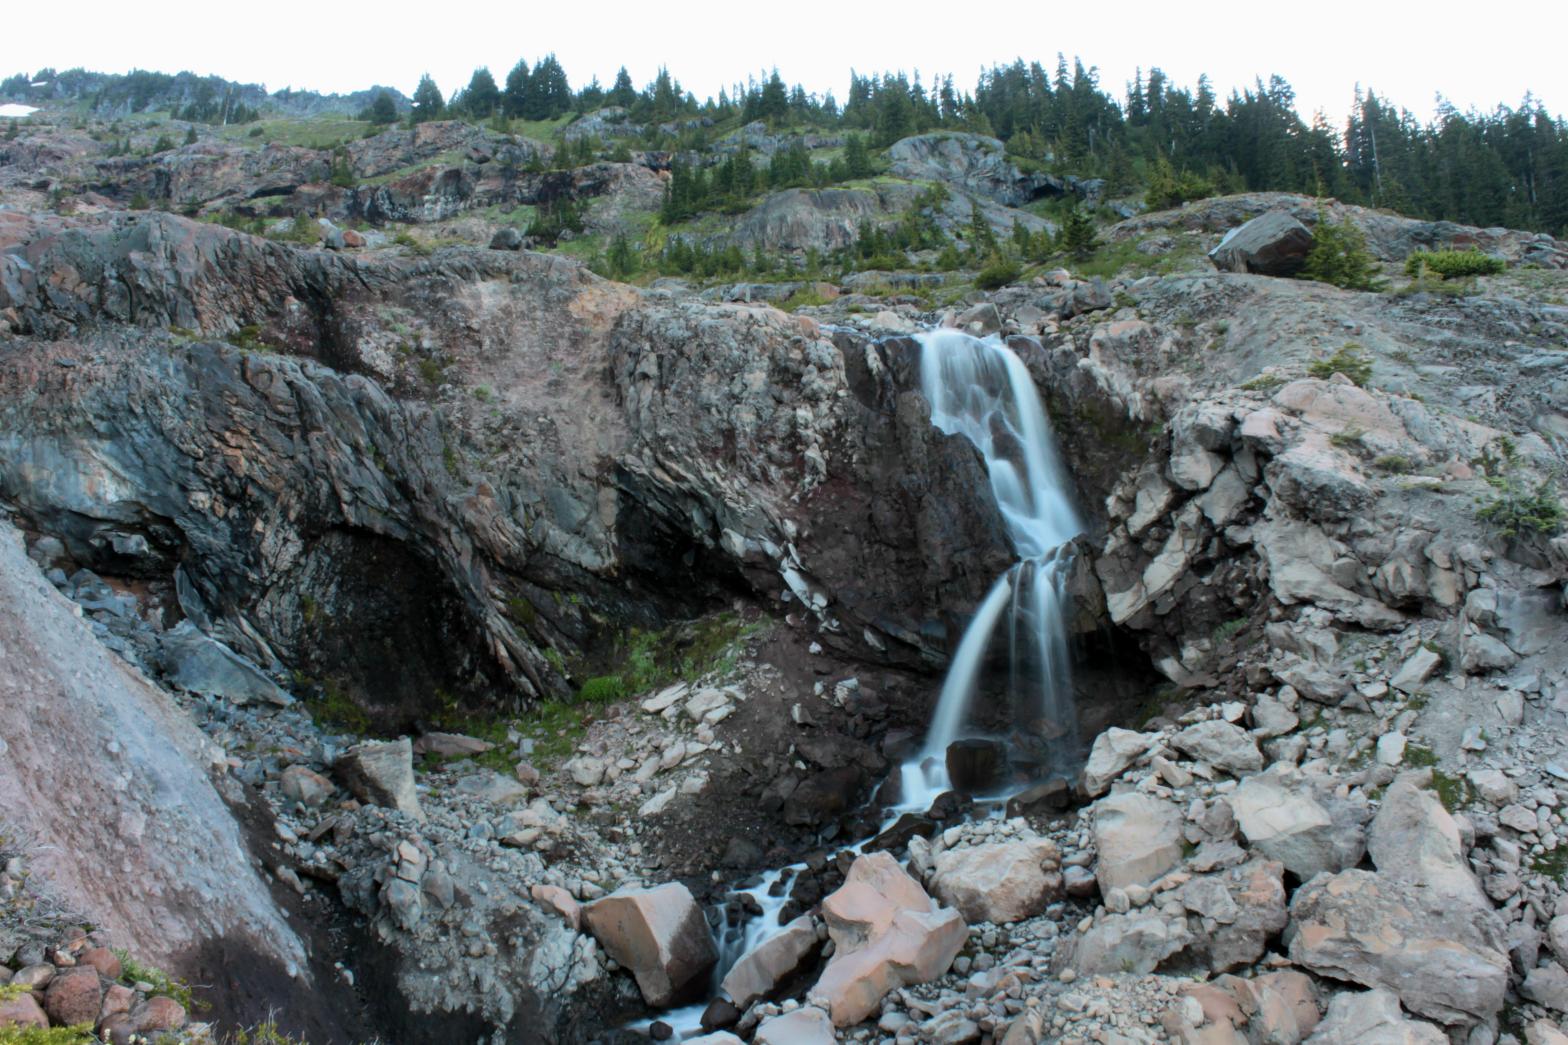 Double Falls from the front